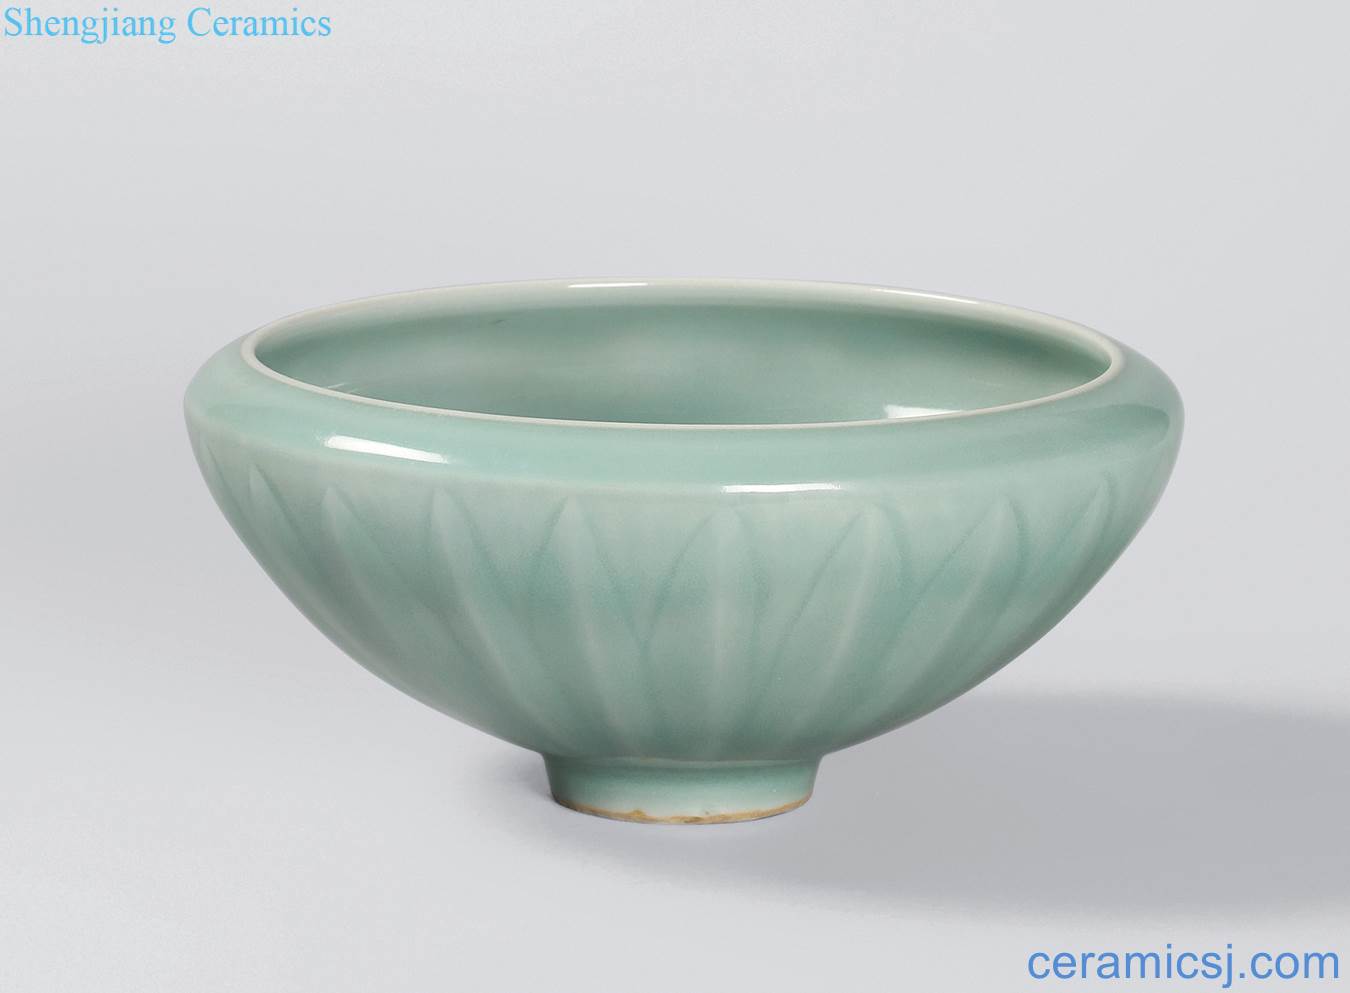 The southern song dynasty (1127-1279), longquan celadon green glaze lotus score petals grain to the folding of the bowl